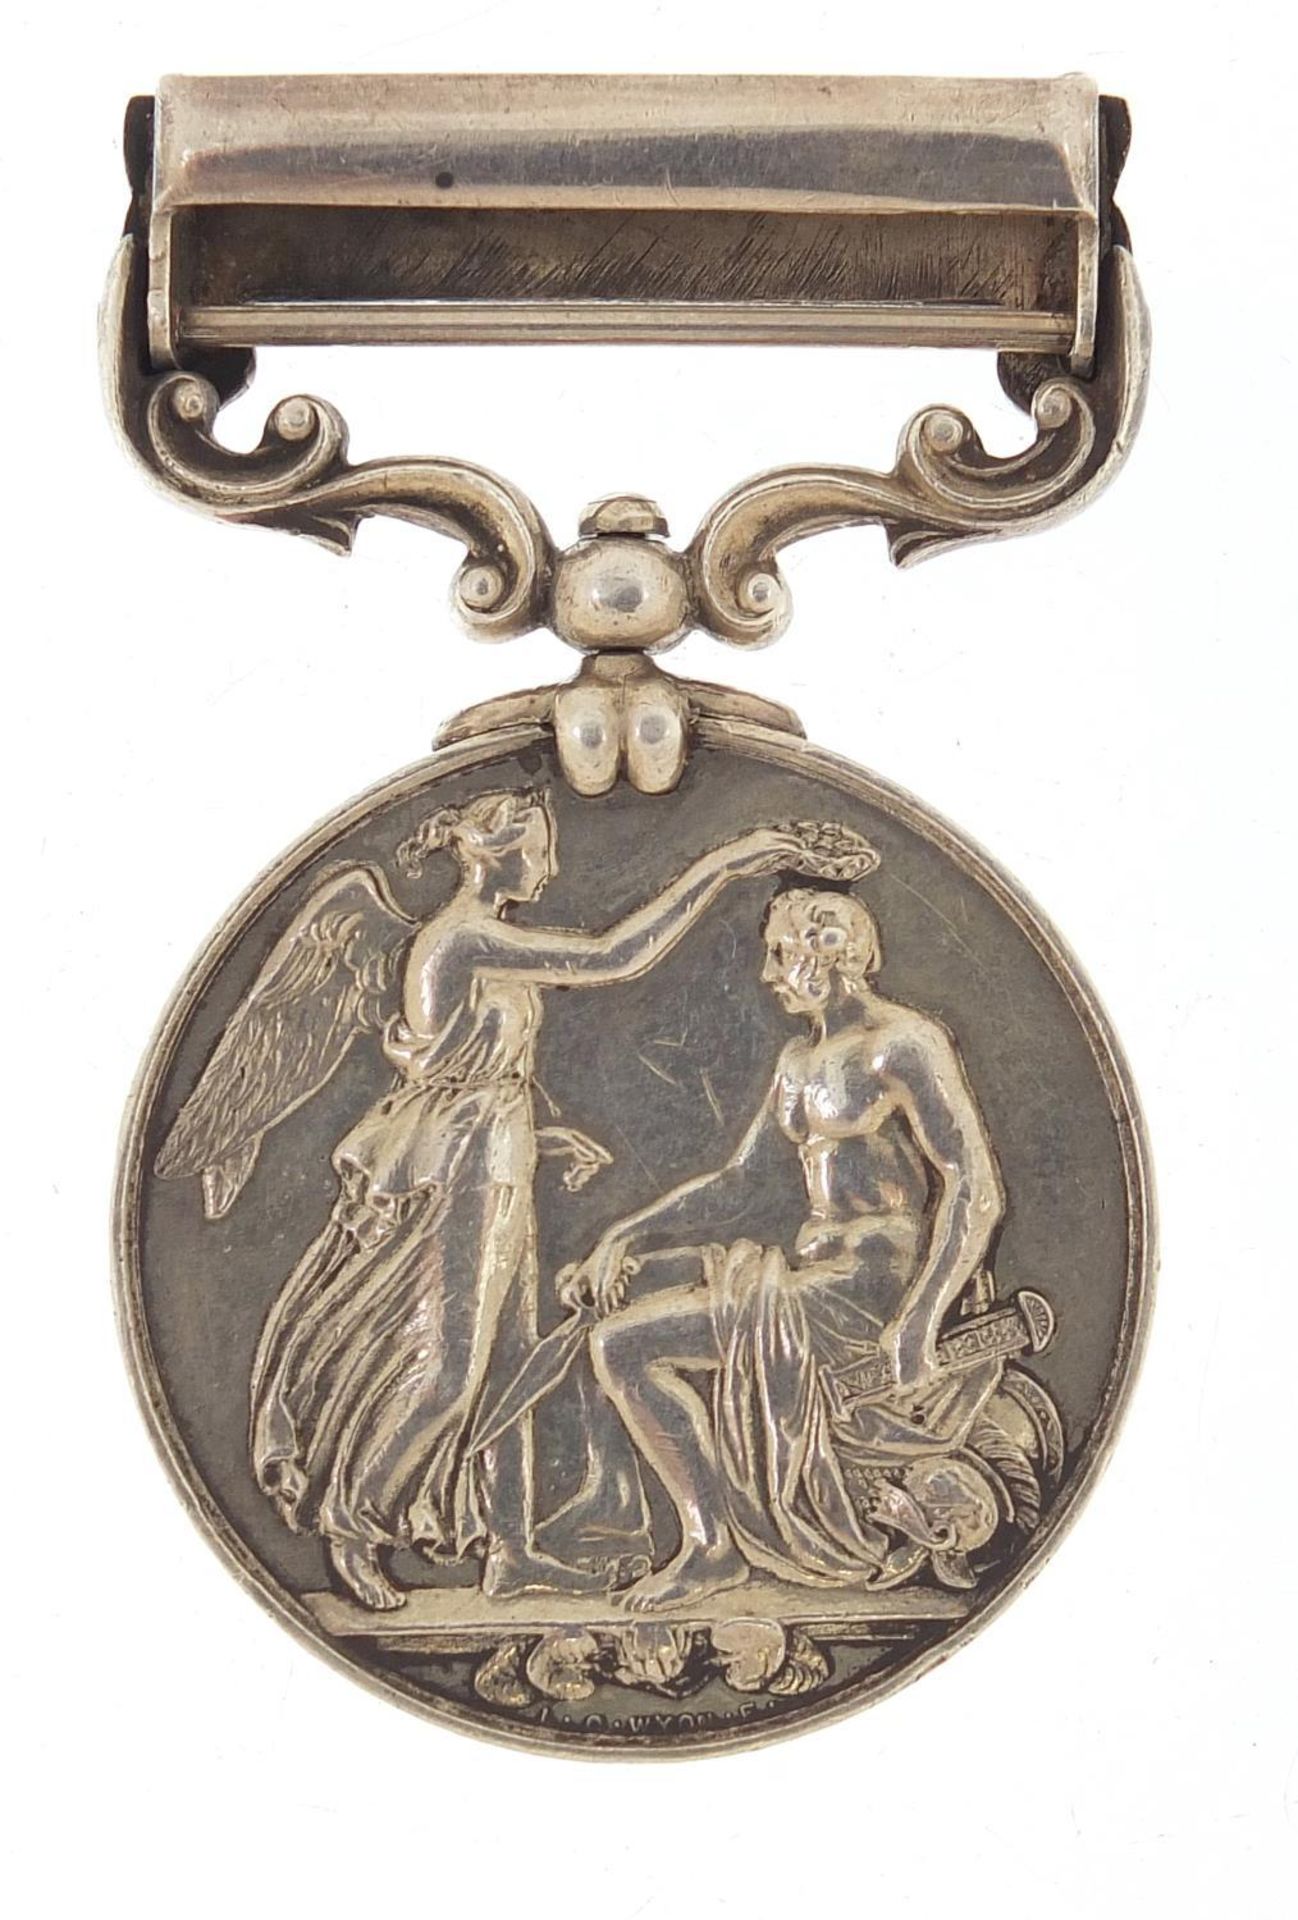 Victorian British military India General Service medal with Burma 1885-7 bar awarded to 605PTE.P. - Image 4 of 4